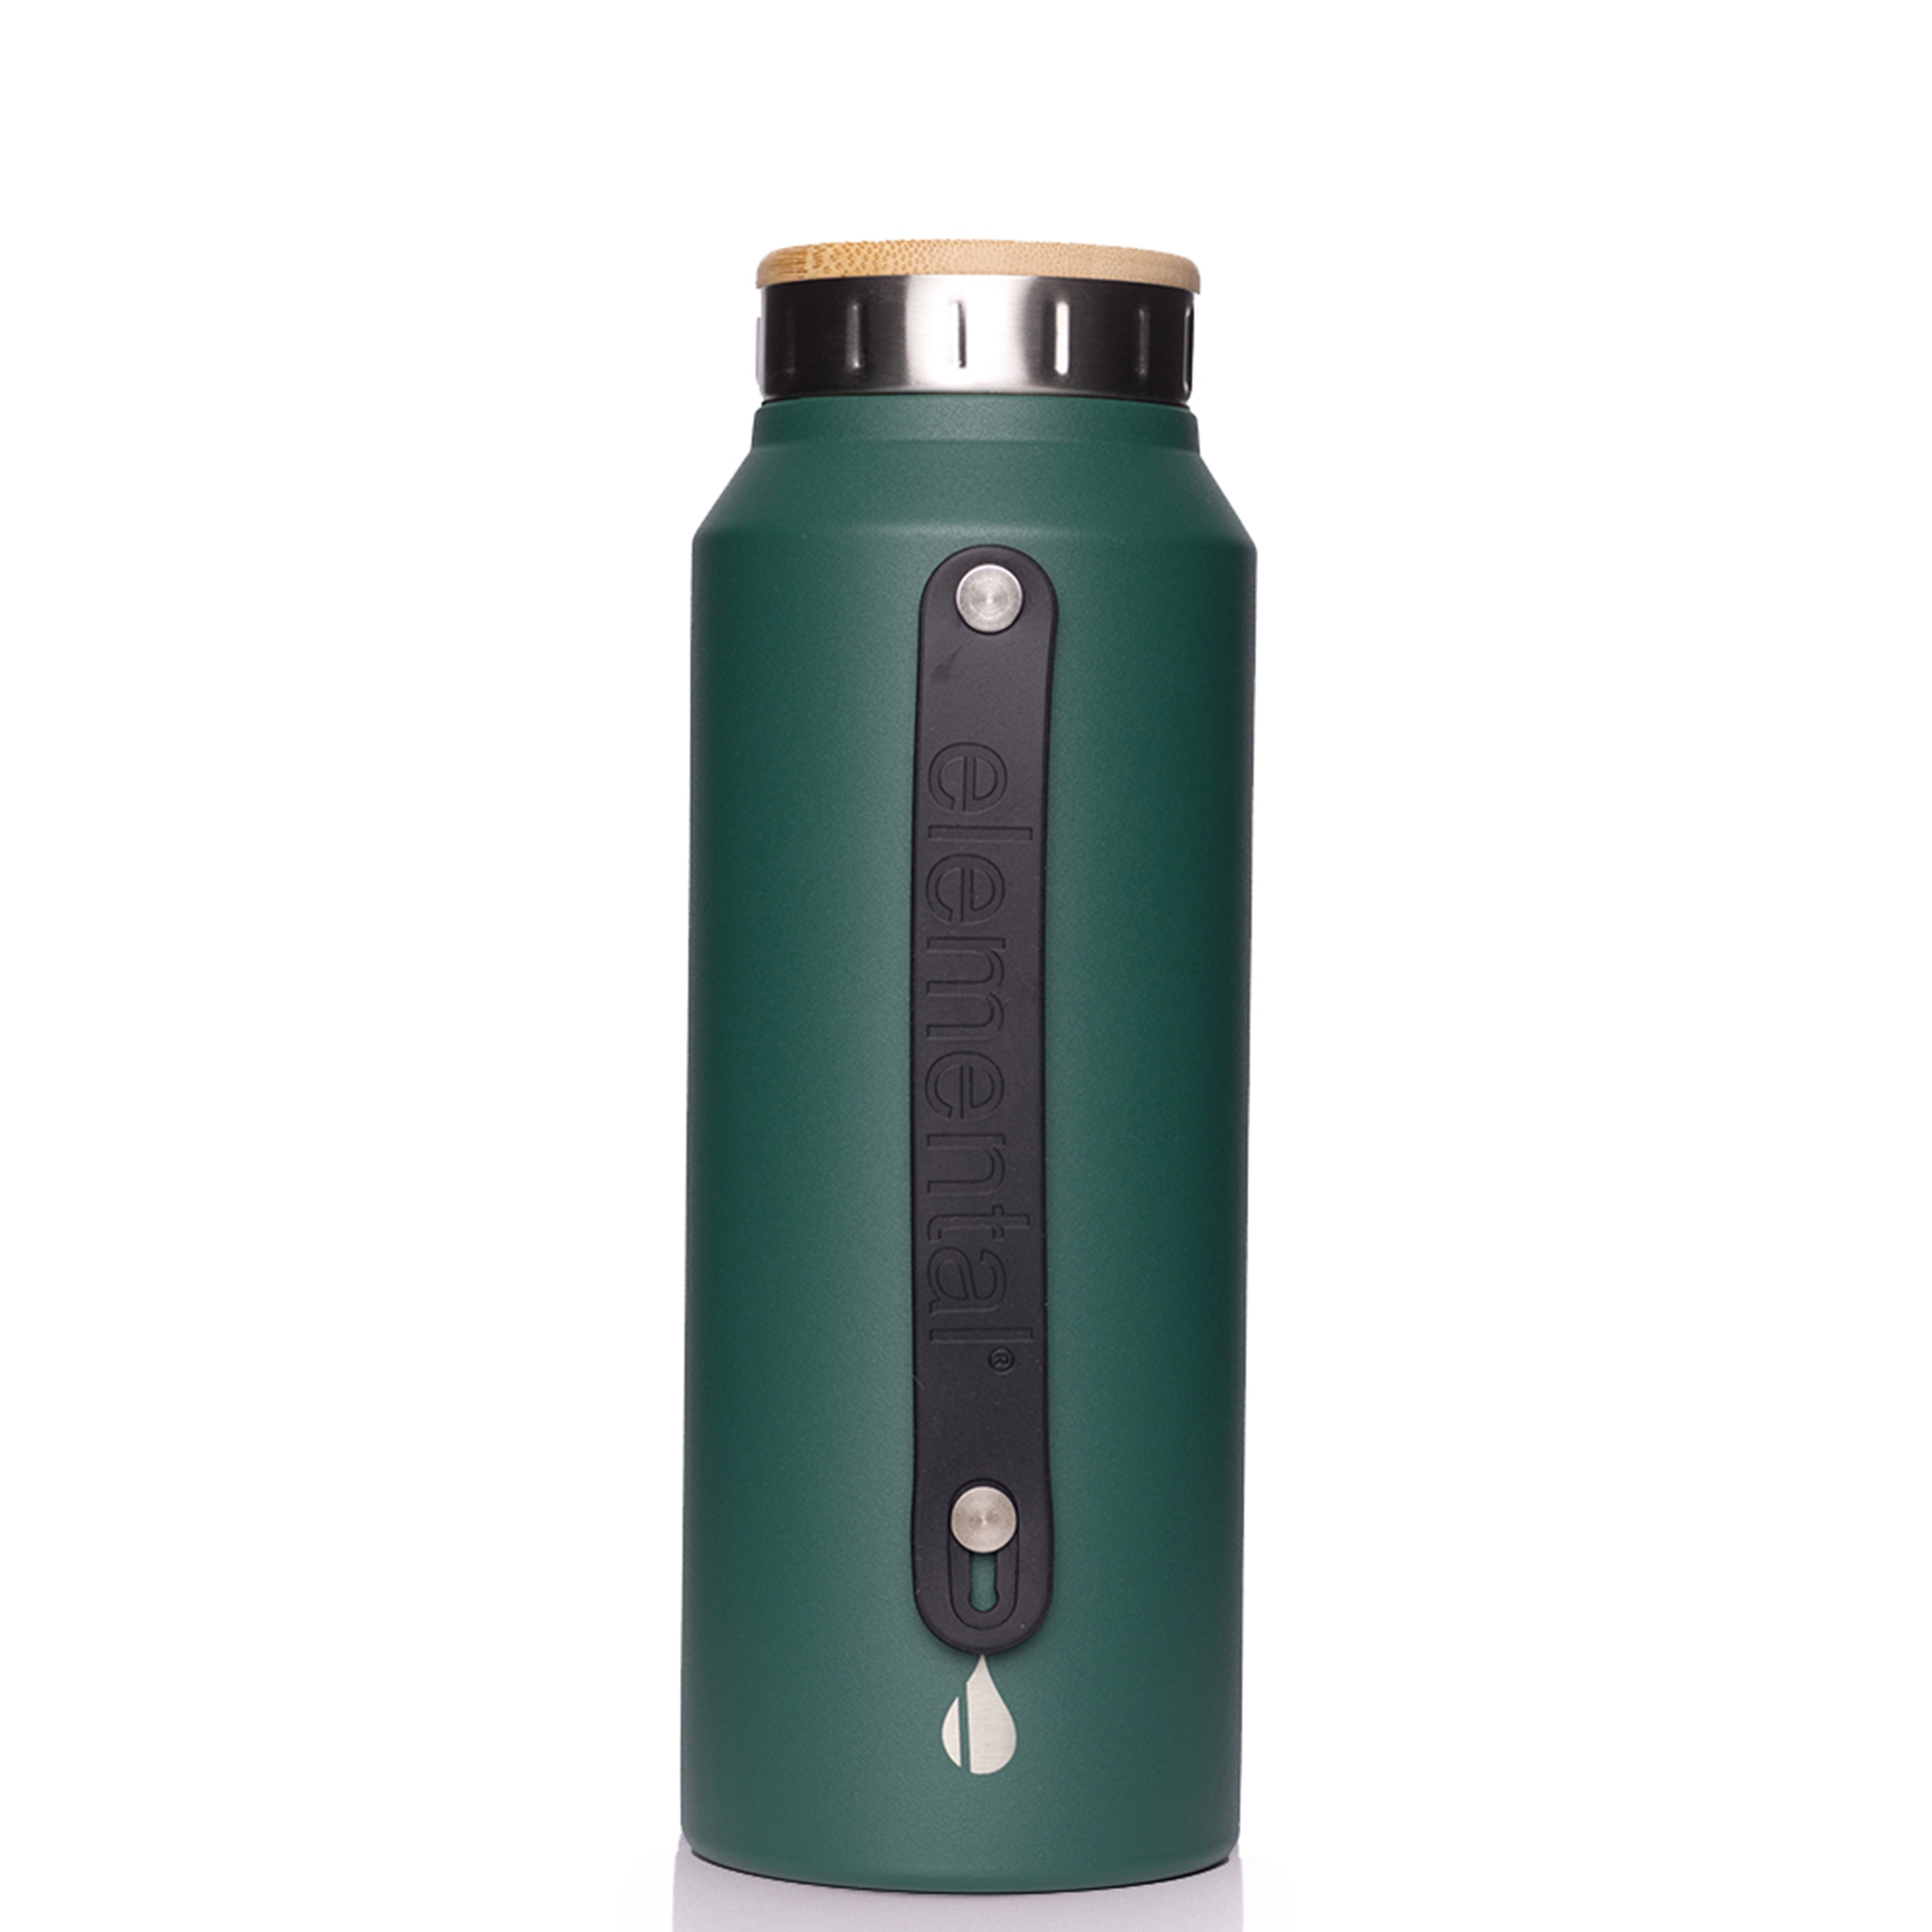 Customizable Elemental® 32 oz Insulated Stainless Steel Bottle in forest green